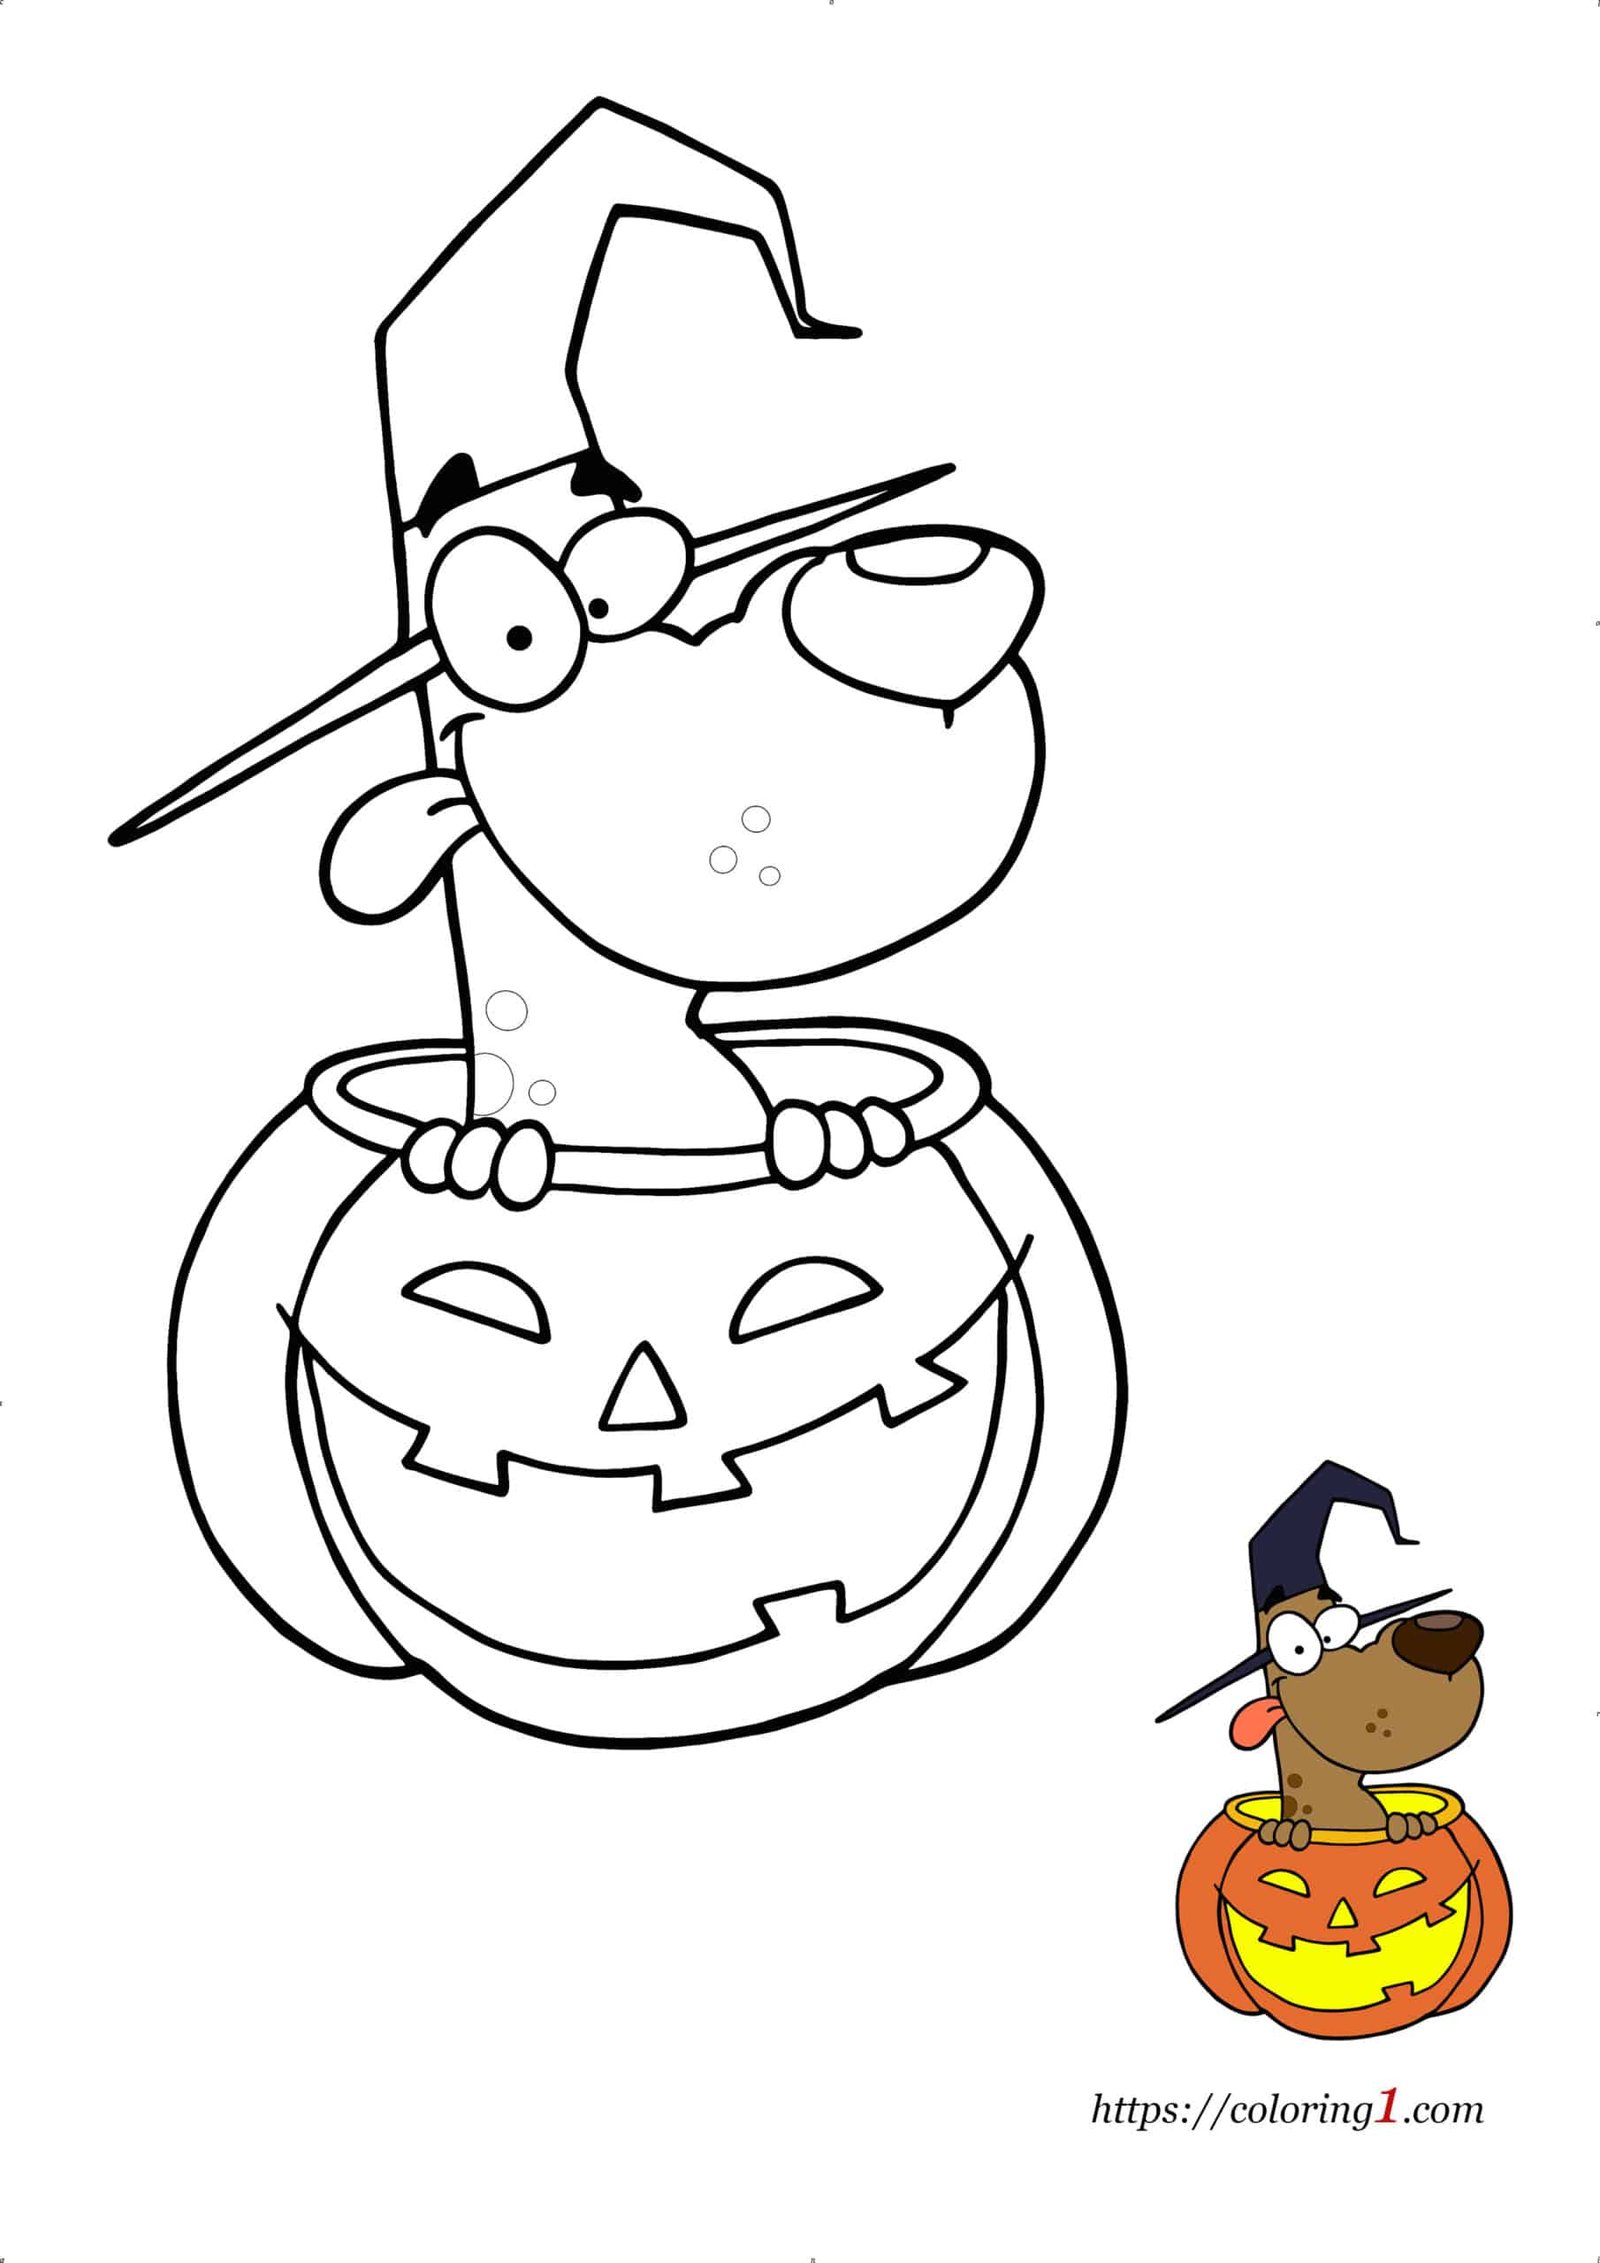 Magic Halloween Dog coloring page to print with sample